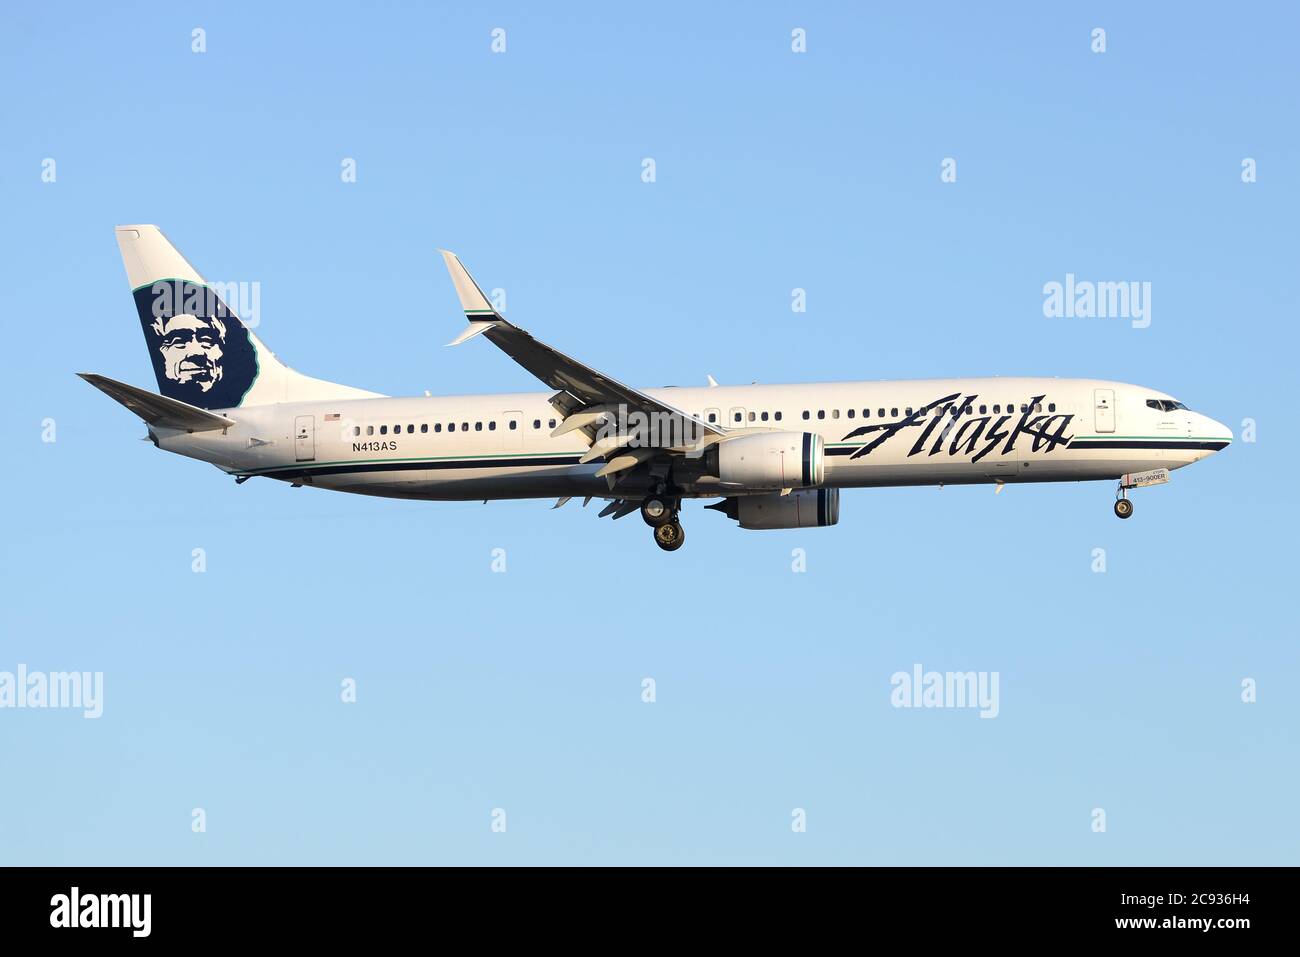 Alaska Airlines Boeing 737-900 with scimitar winglets arriving at Los Angeles Airport LAX. Aircraft with Alaska's old livery. Airplane N413AS. Stock Photo